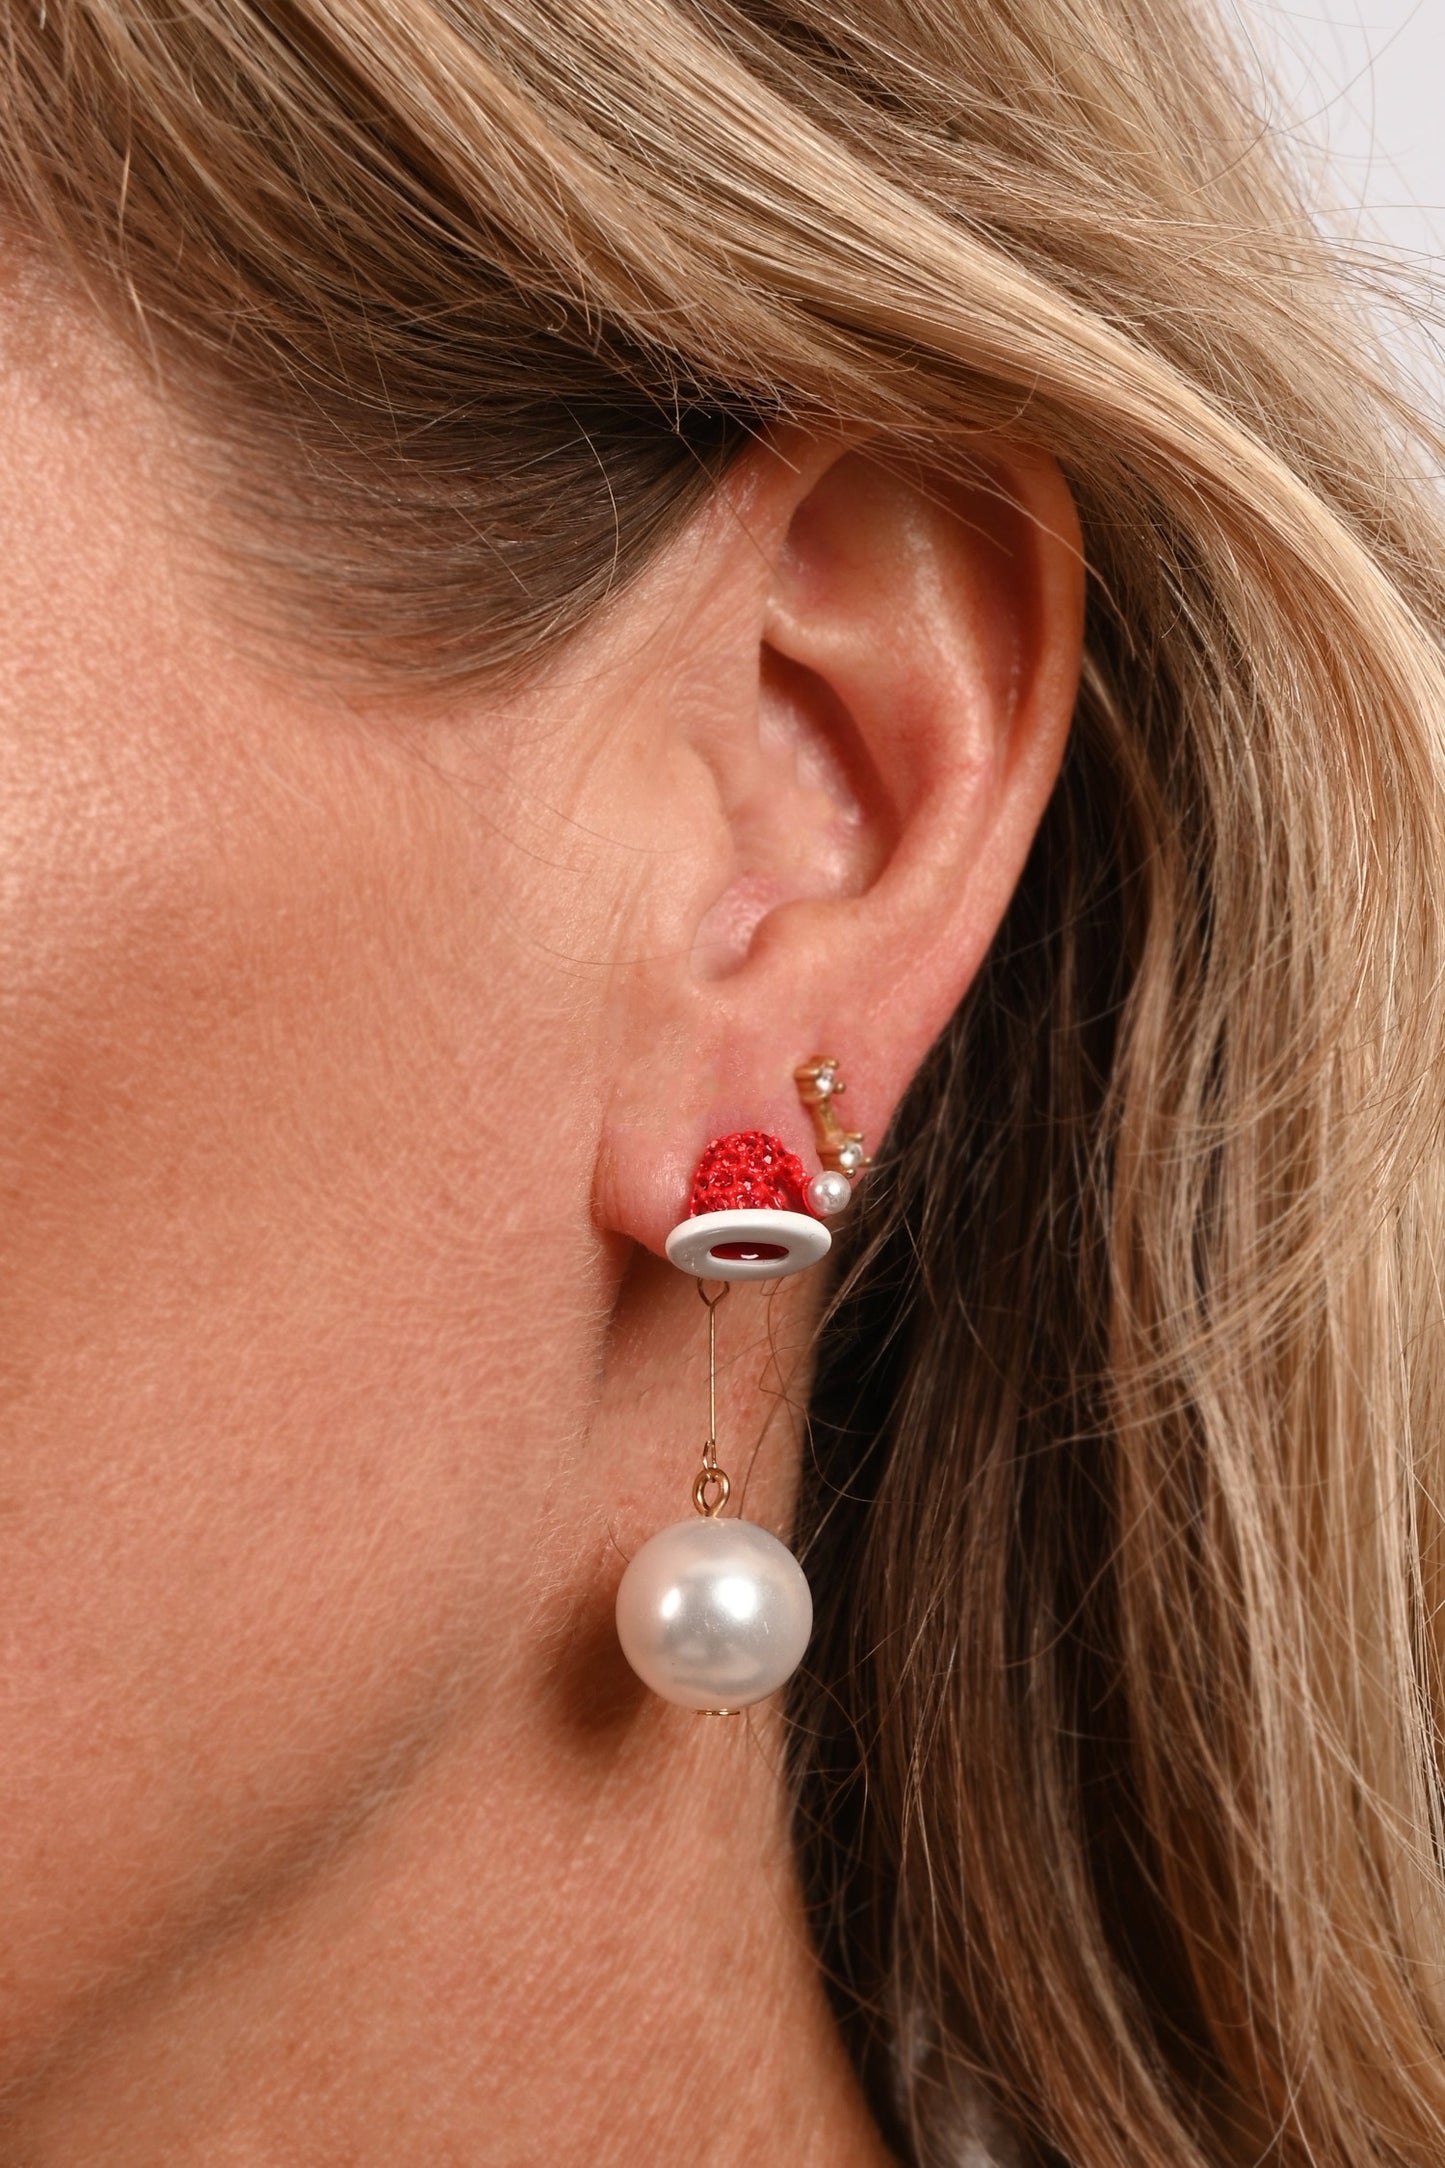 Christmas Earrings "X-mas hats with Pearls"